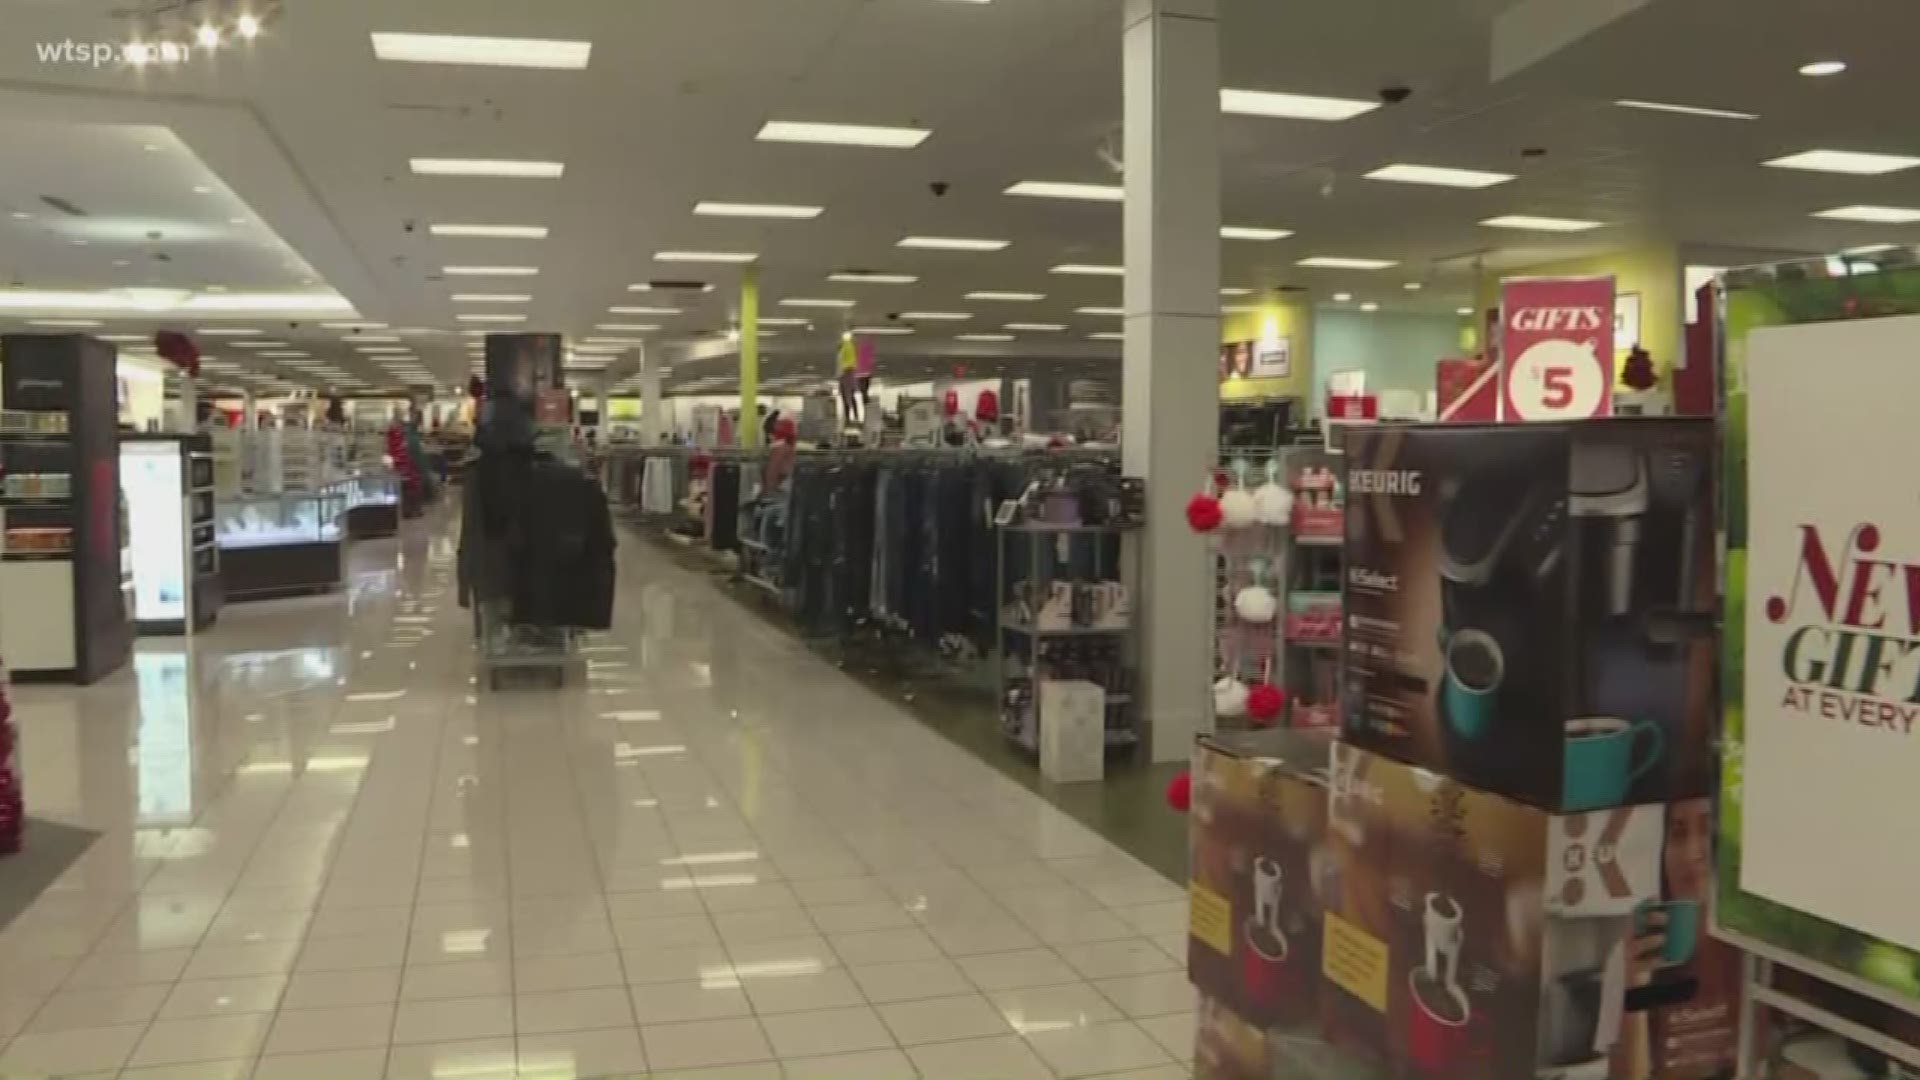 Some stores are open until Tuesday night to accommodate last-minute shoppers.